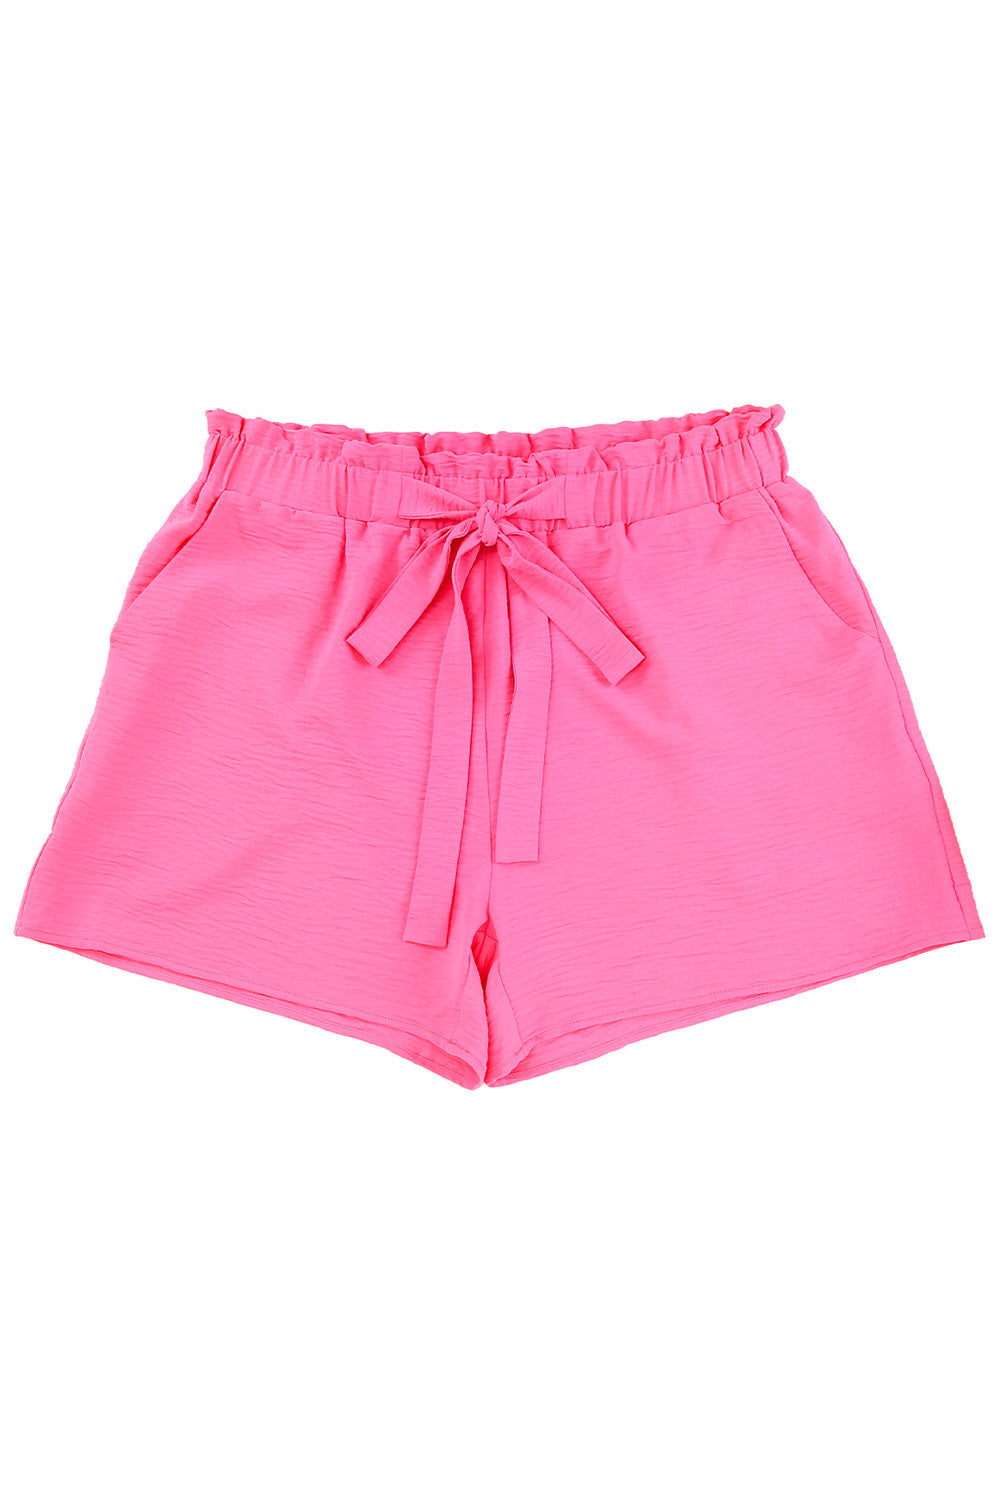 Rose Paperbag High Waist Textured Plus Size Casual Shorts